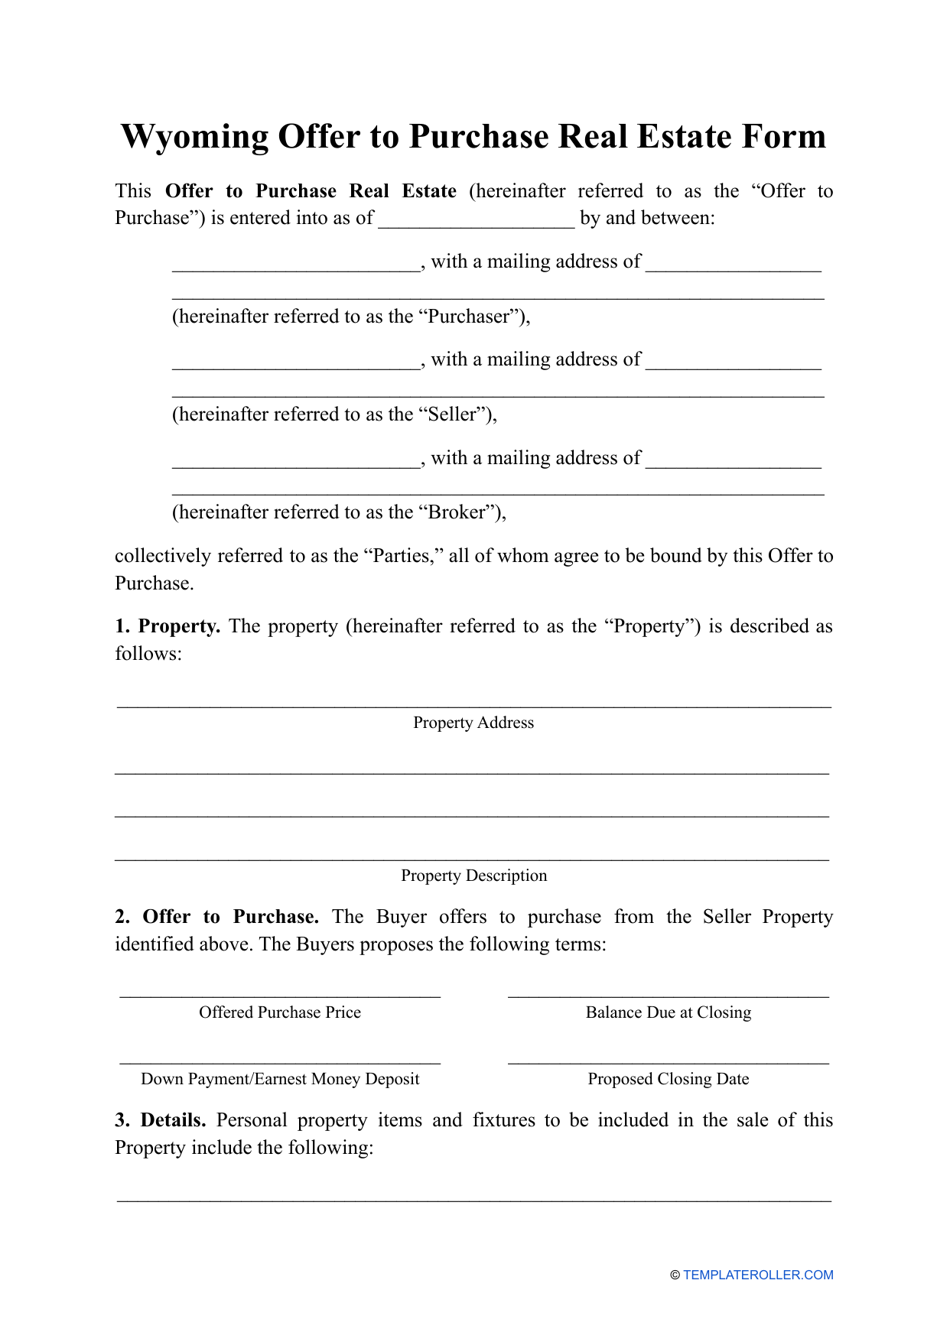 Offer to Purchase Real Estate Form - Wyoming, Page 1